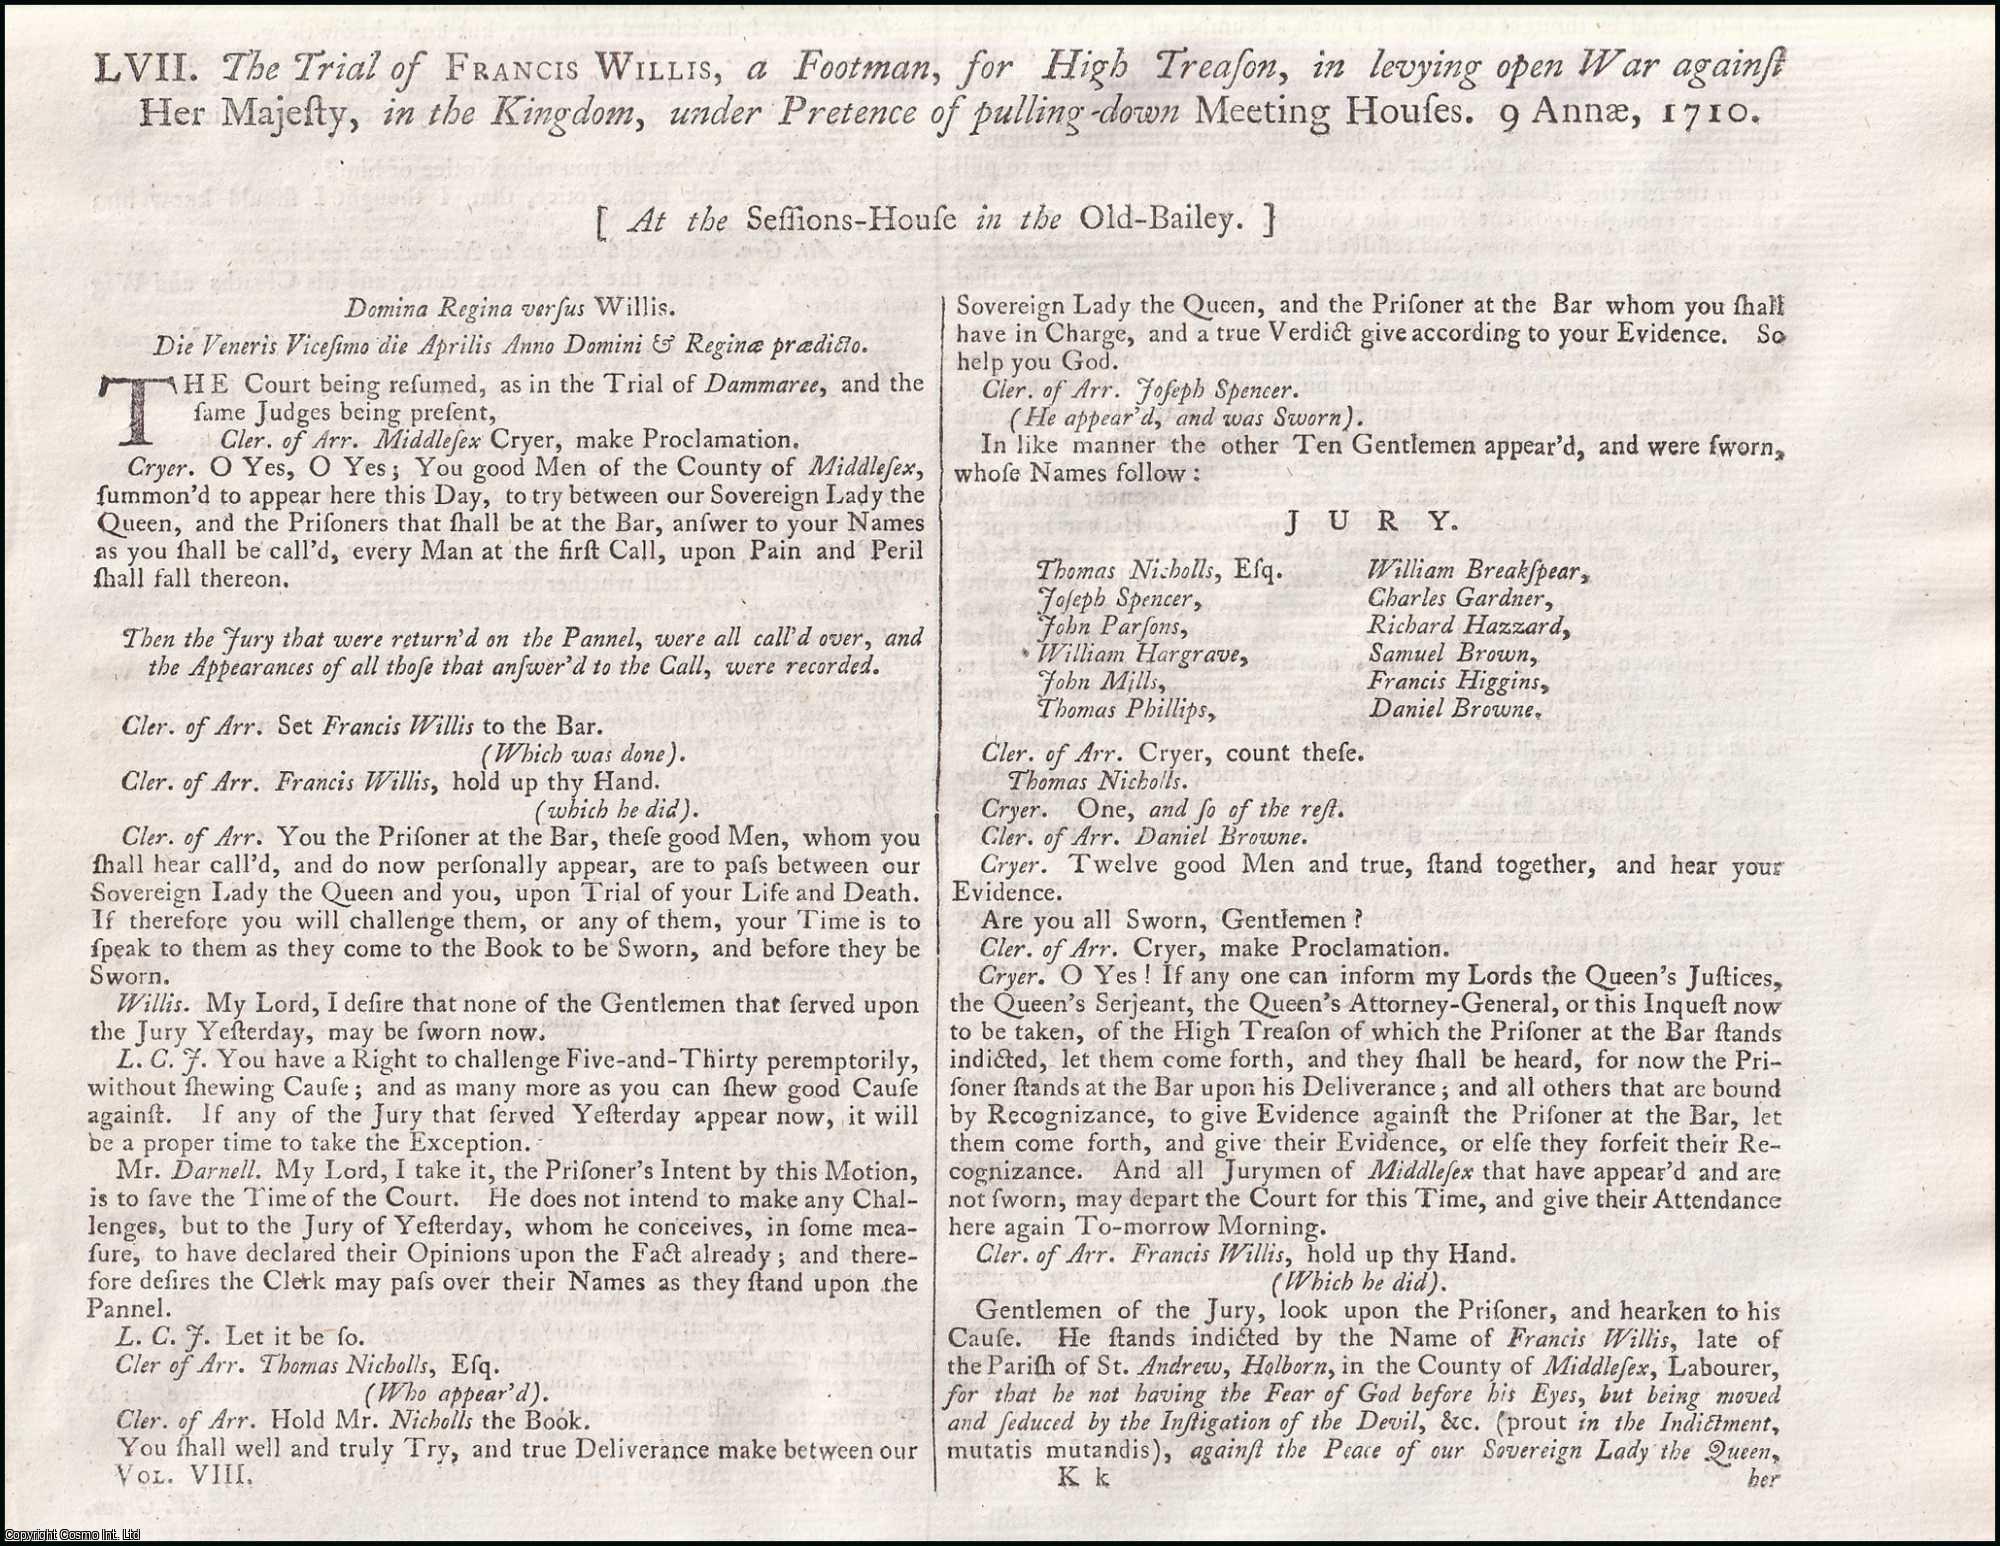 [Trial]. - The Trial of Francis Willis, a Footman, for High Treason, in levying open War against her Majesty, in the Kingdom, under Pretence of pulling-down Meeting Houses, 1710. An original report from the Collected State Trials.